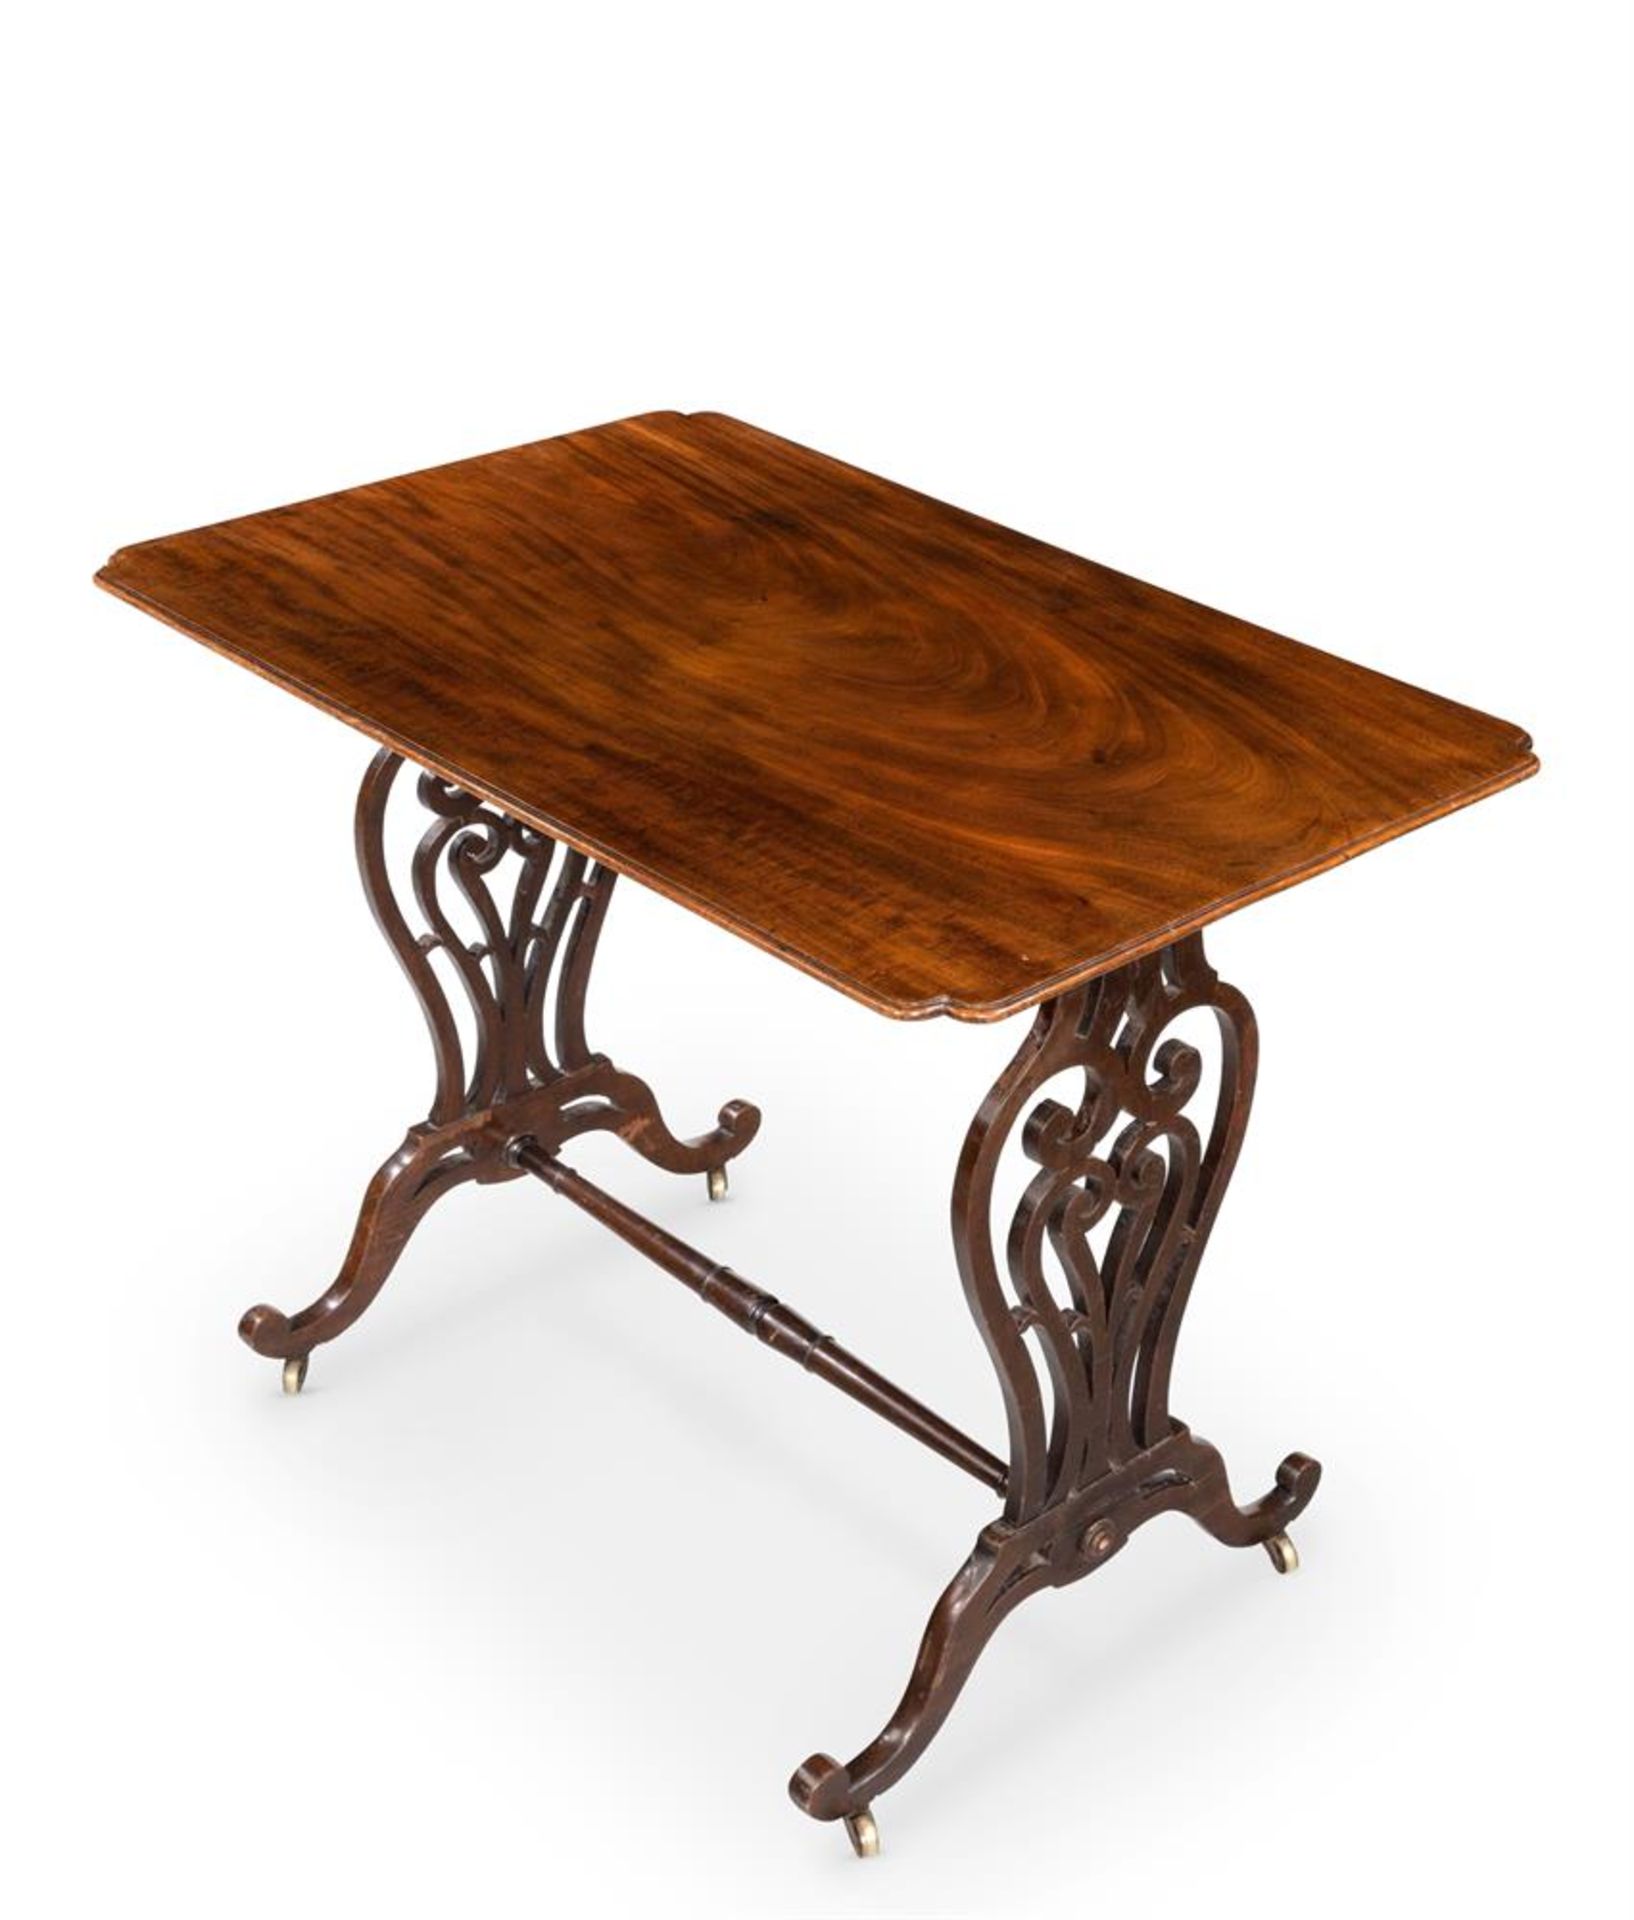 A GEORGE III MAHOGANY SIDE OR WRITING TABLE, LATE 18TH CENTURY